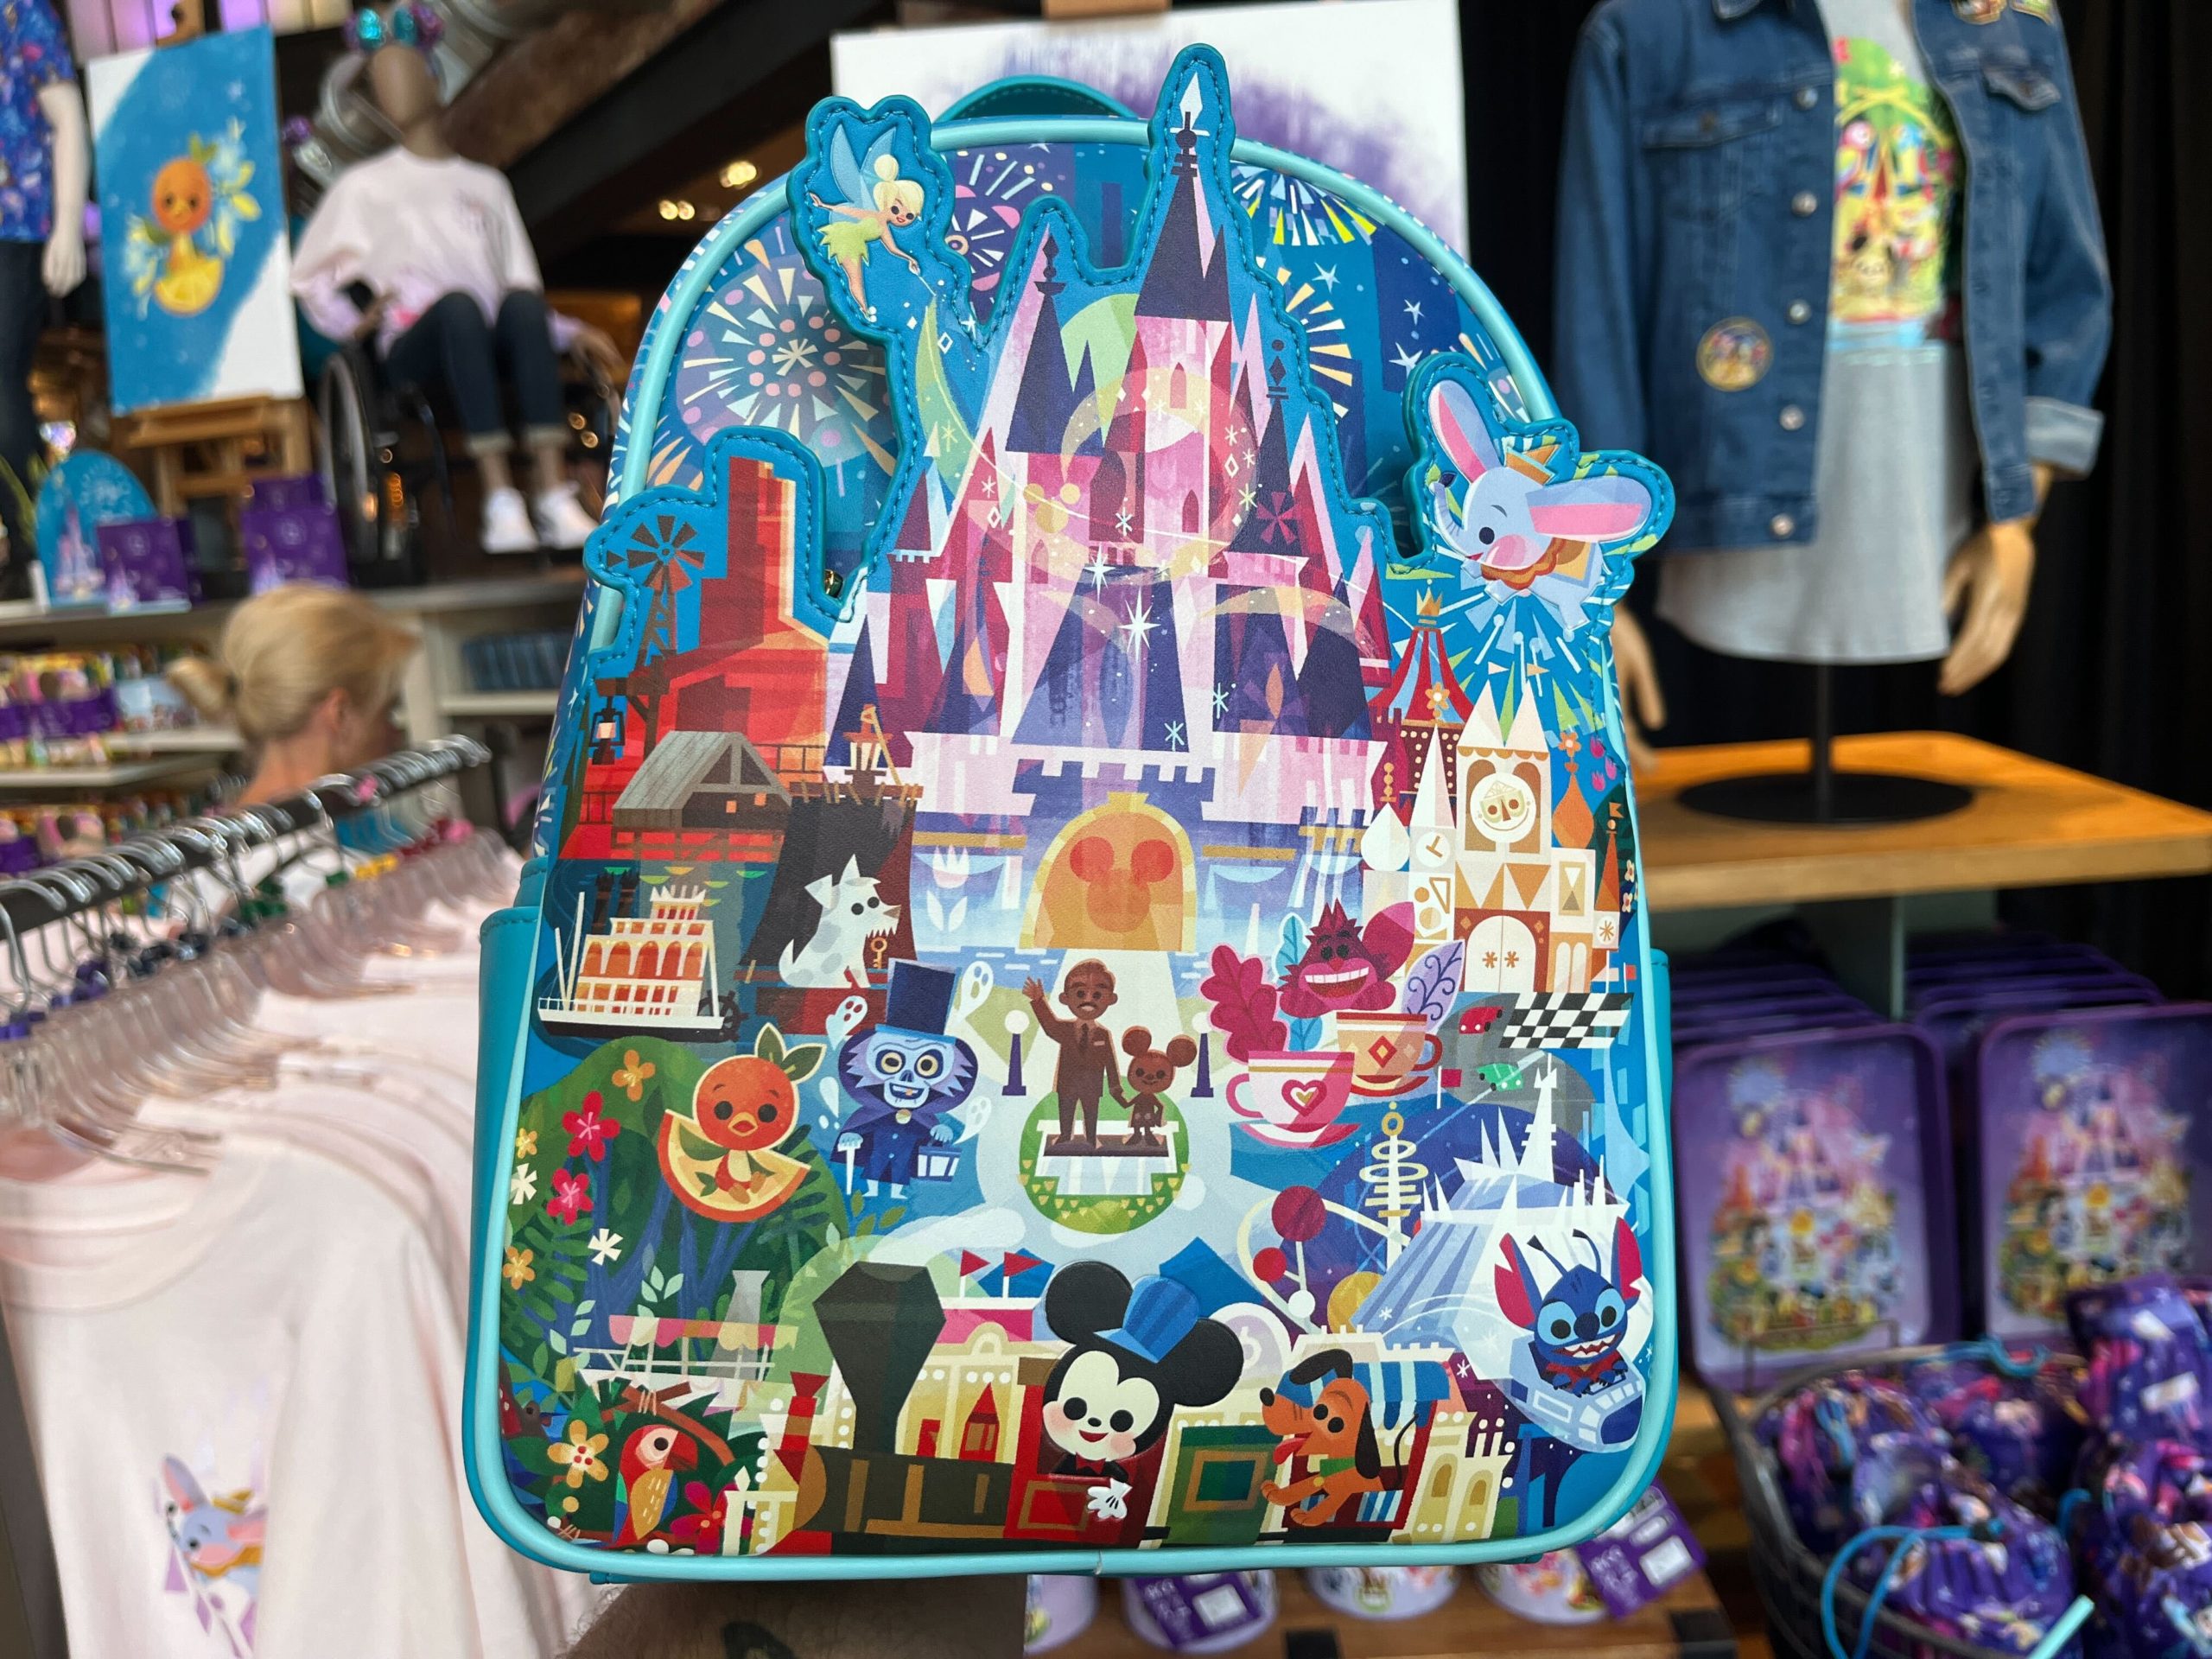 REVIEW: Loungefly Mini Backpack for My Disney Trip + Photos